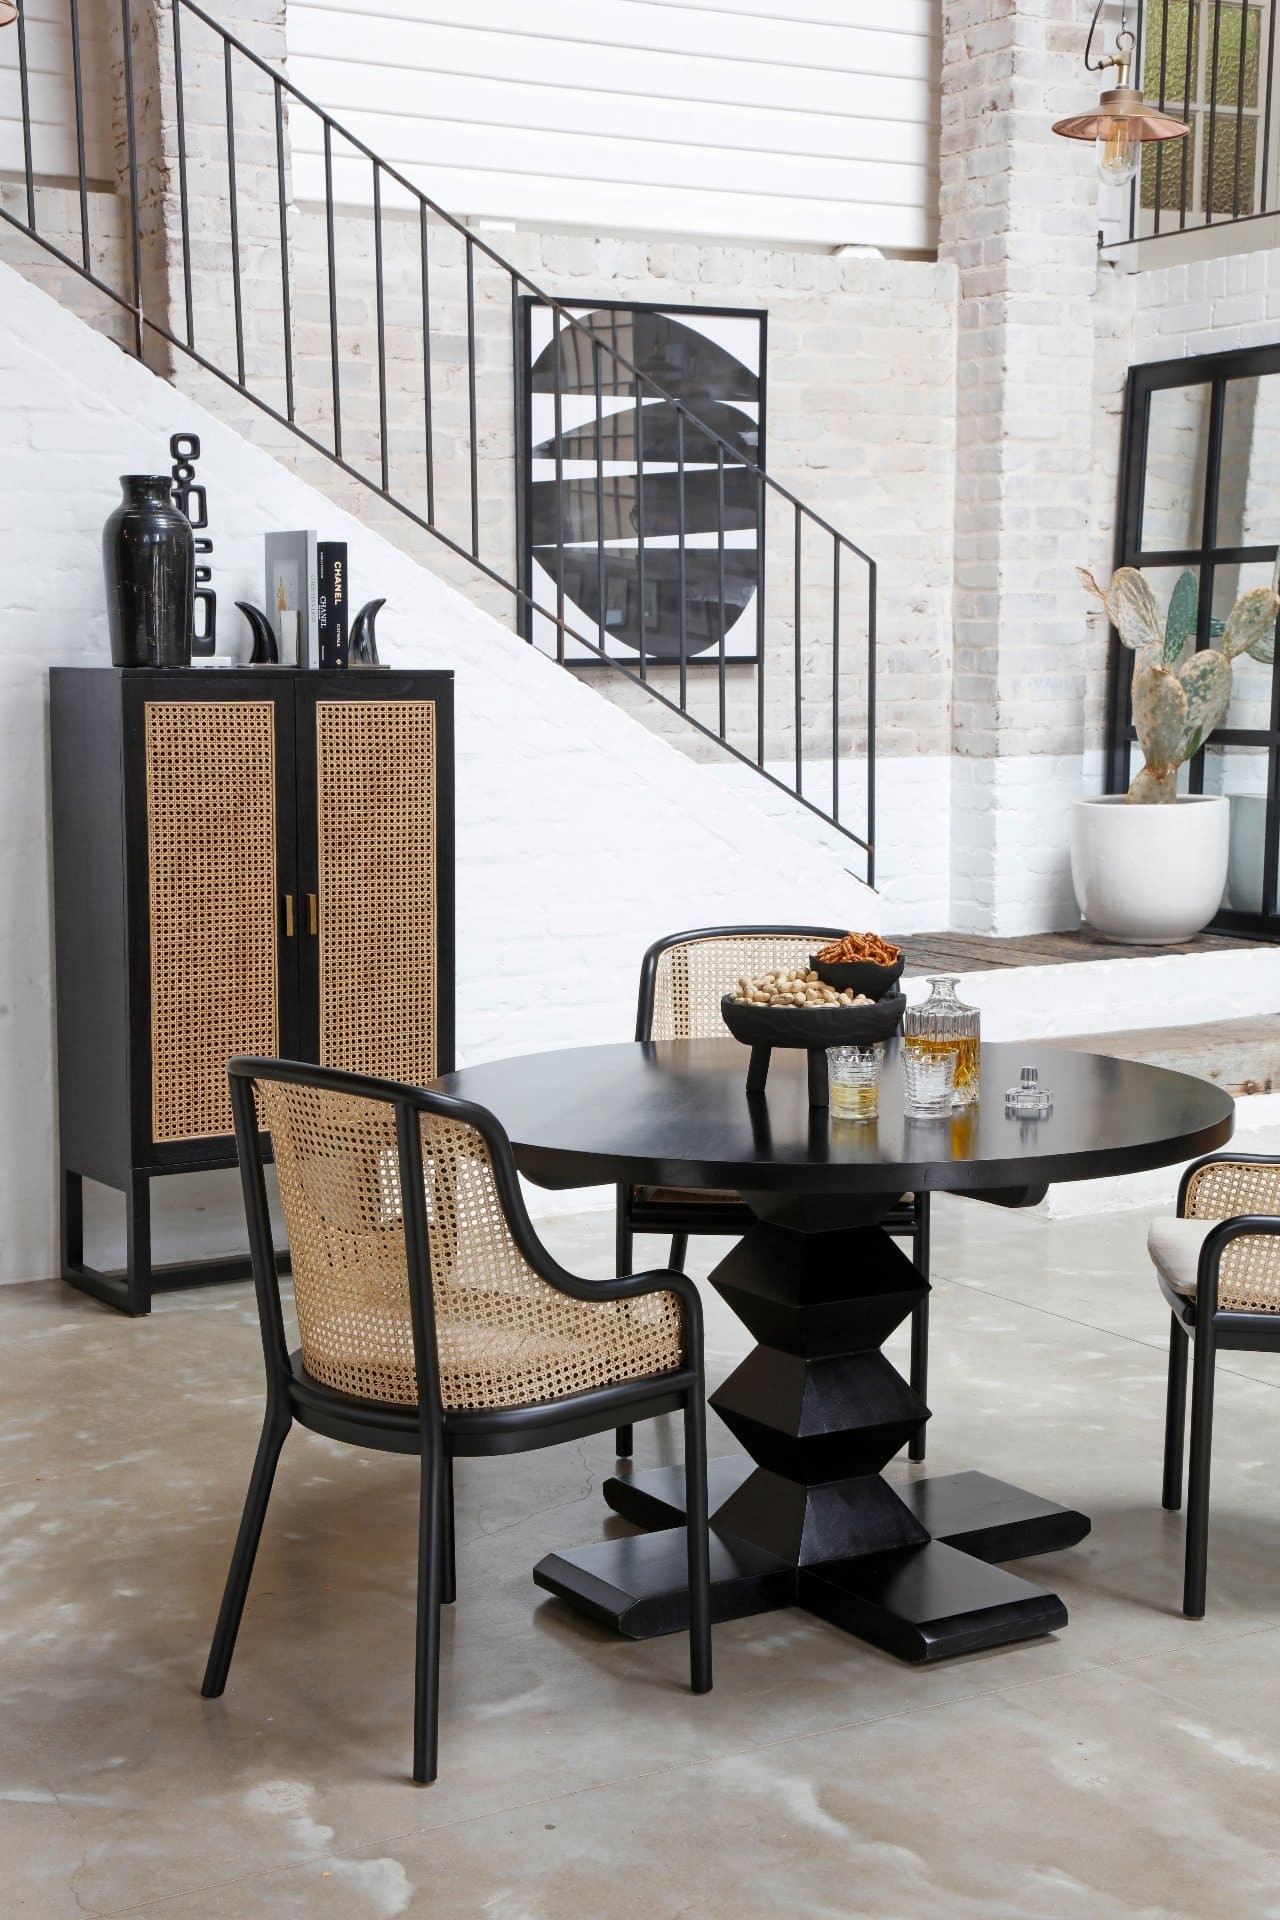 oz design dining room furniture with rattan storage cabinet and round black dining table